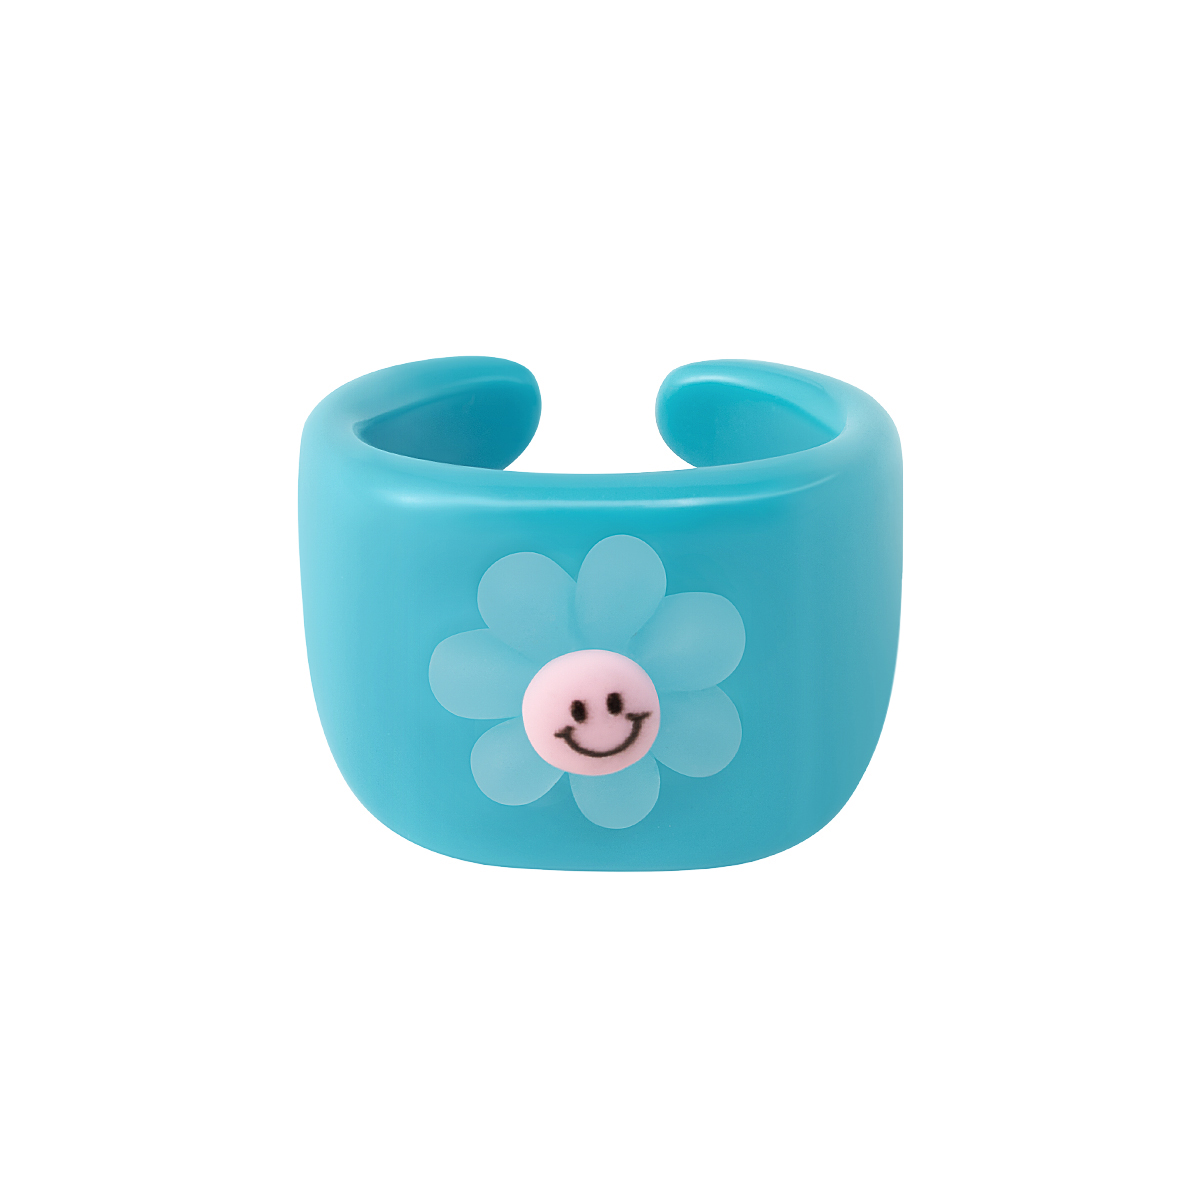 Flower candy ring